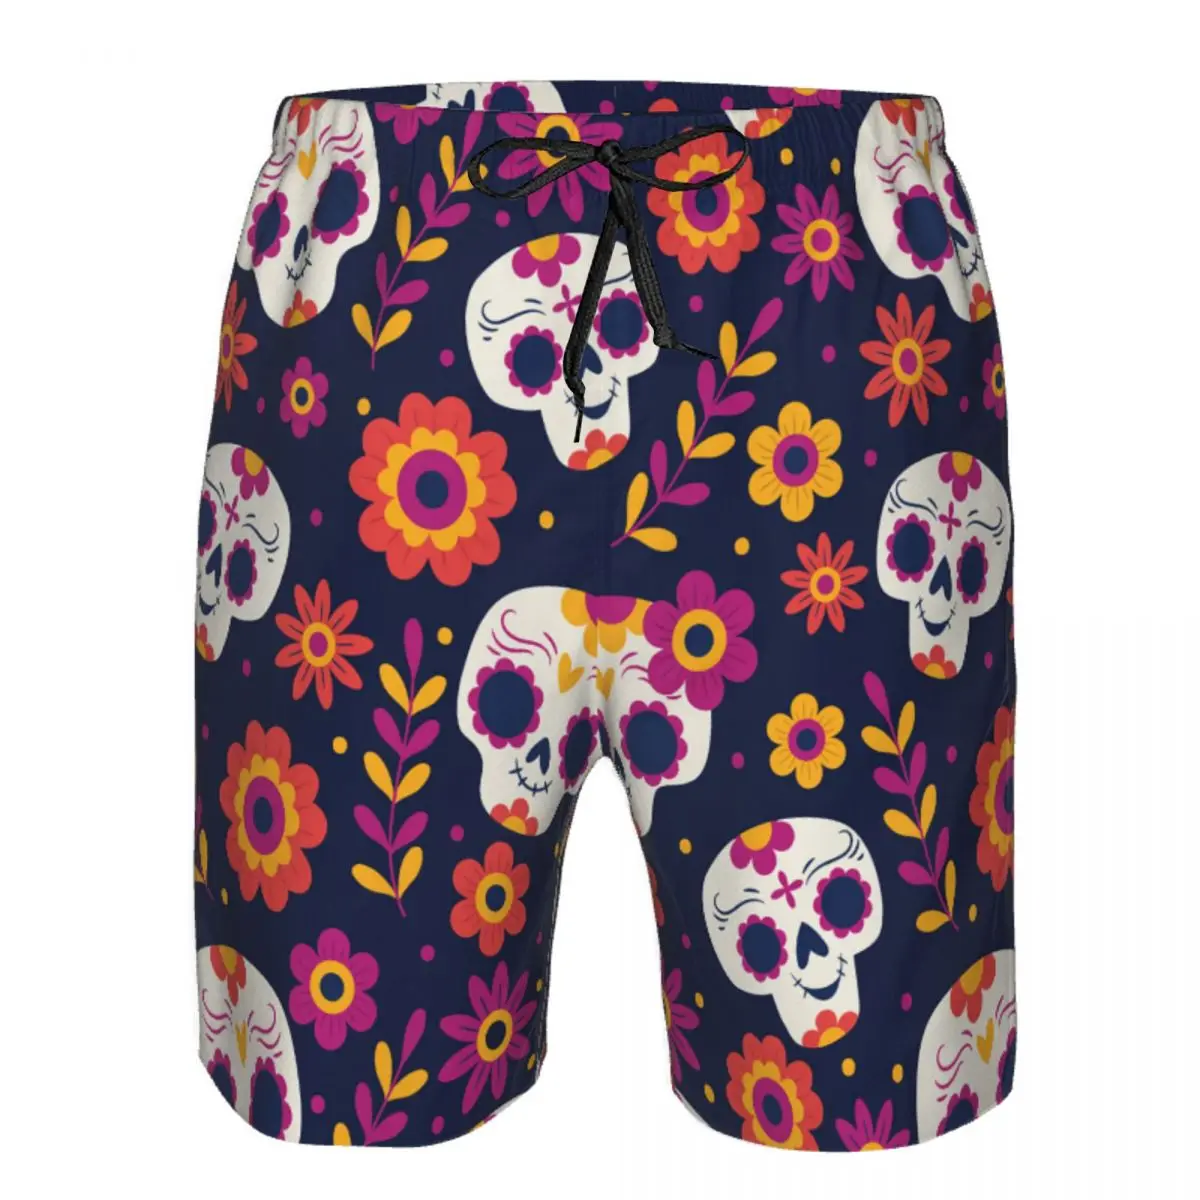 

Swimsuit Beach Quick Drying Trunks For Men Day Of The Dead Skull And Flowers Swimwear Briefs Board Shorts Fast Dry Beachwear